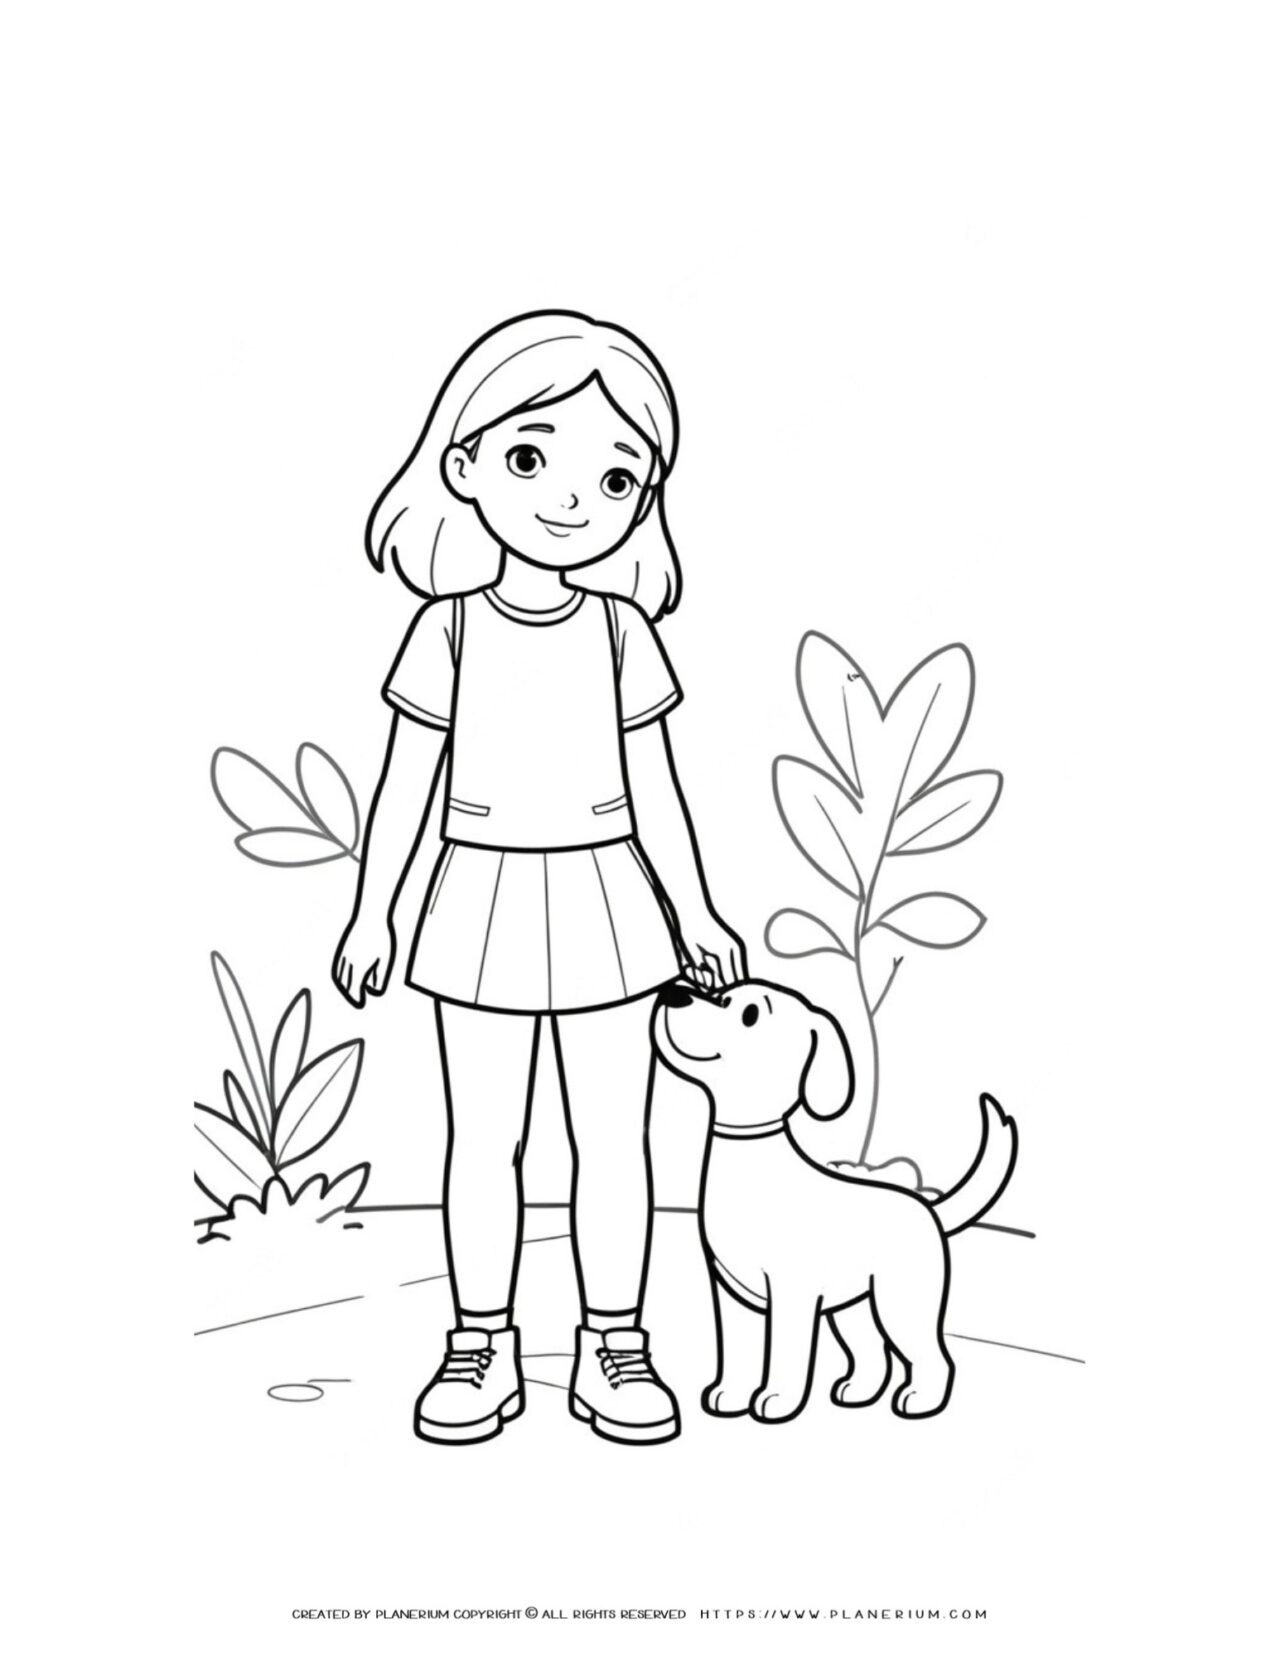 girl-and-little-dog-outside-coloring-page-for-kids